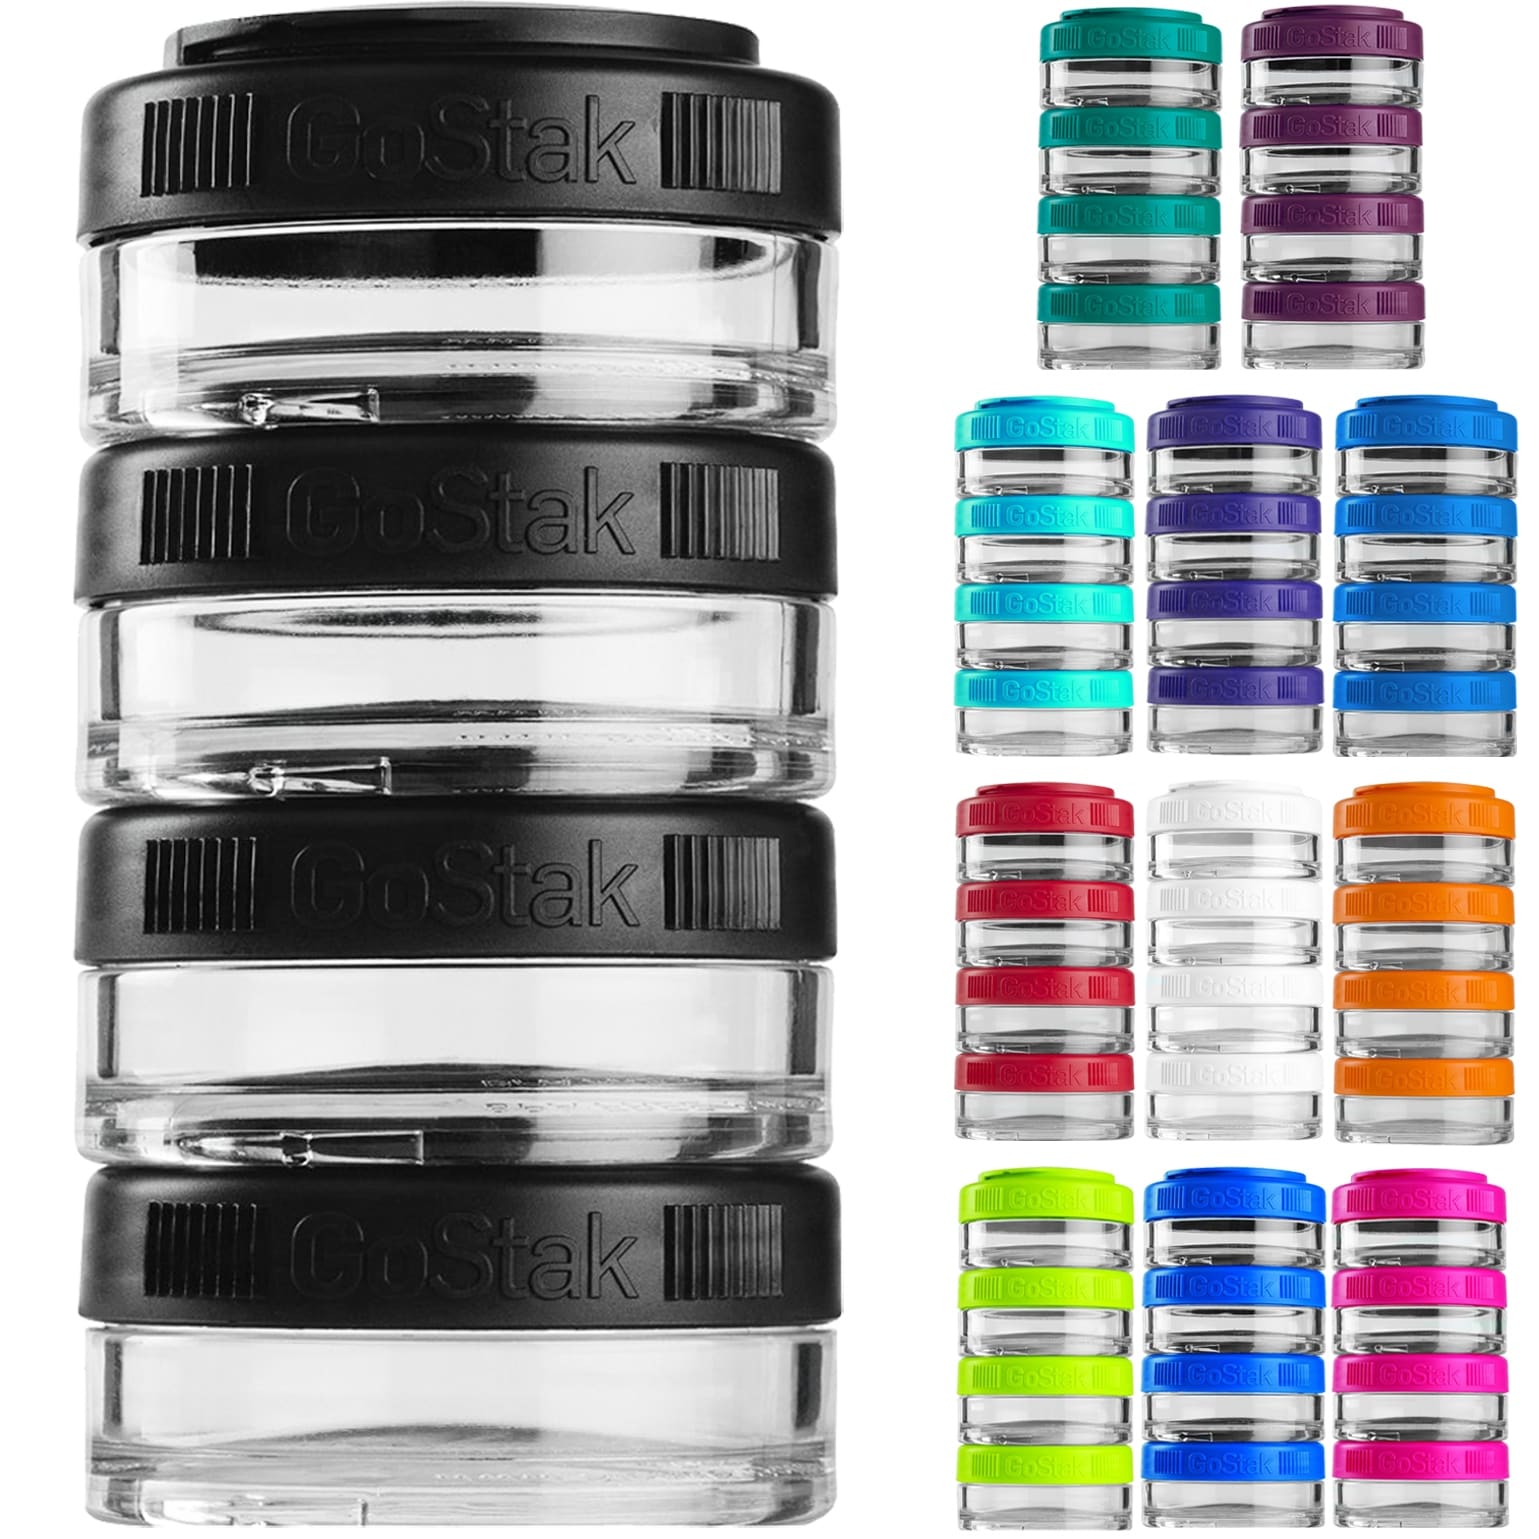 BlenderBottle GoStak Portable Containers (4 ct)